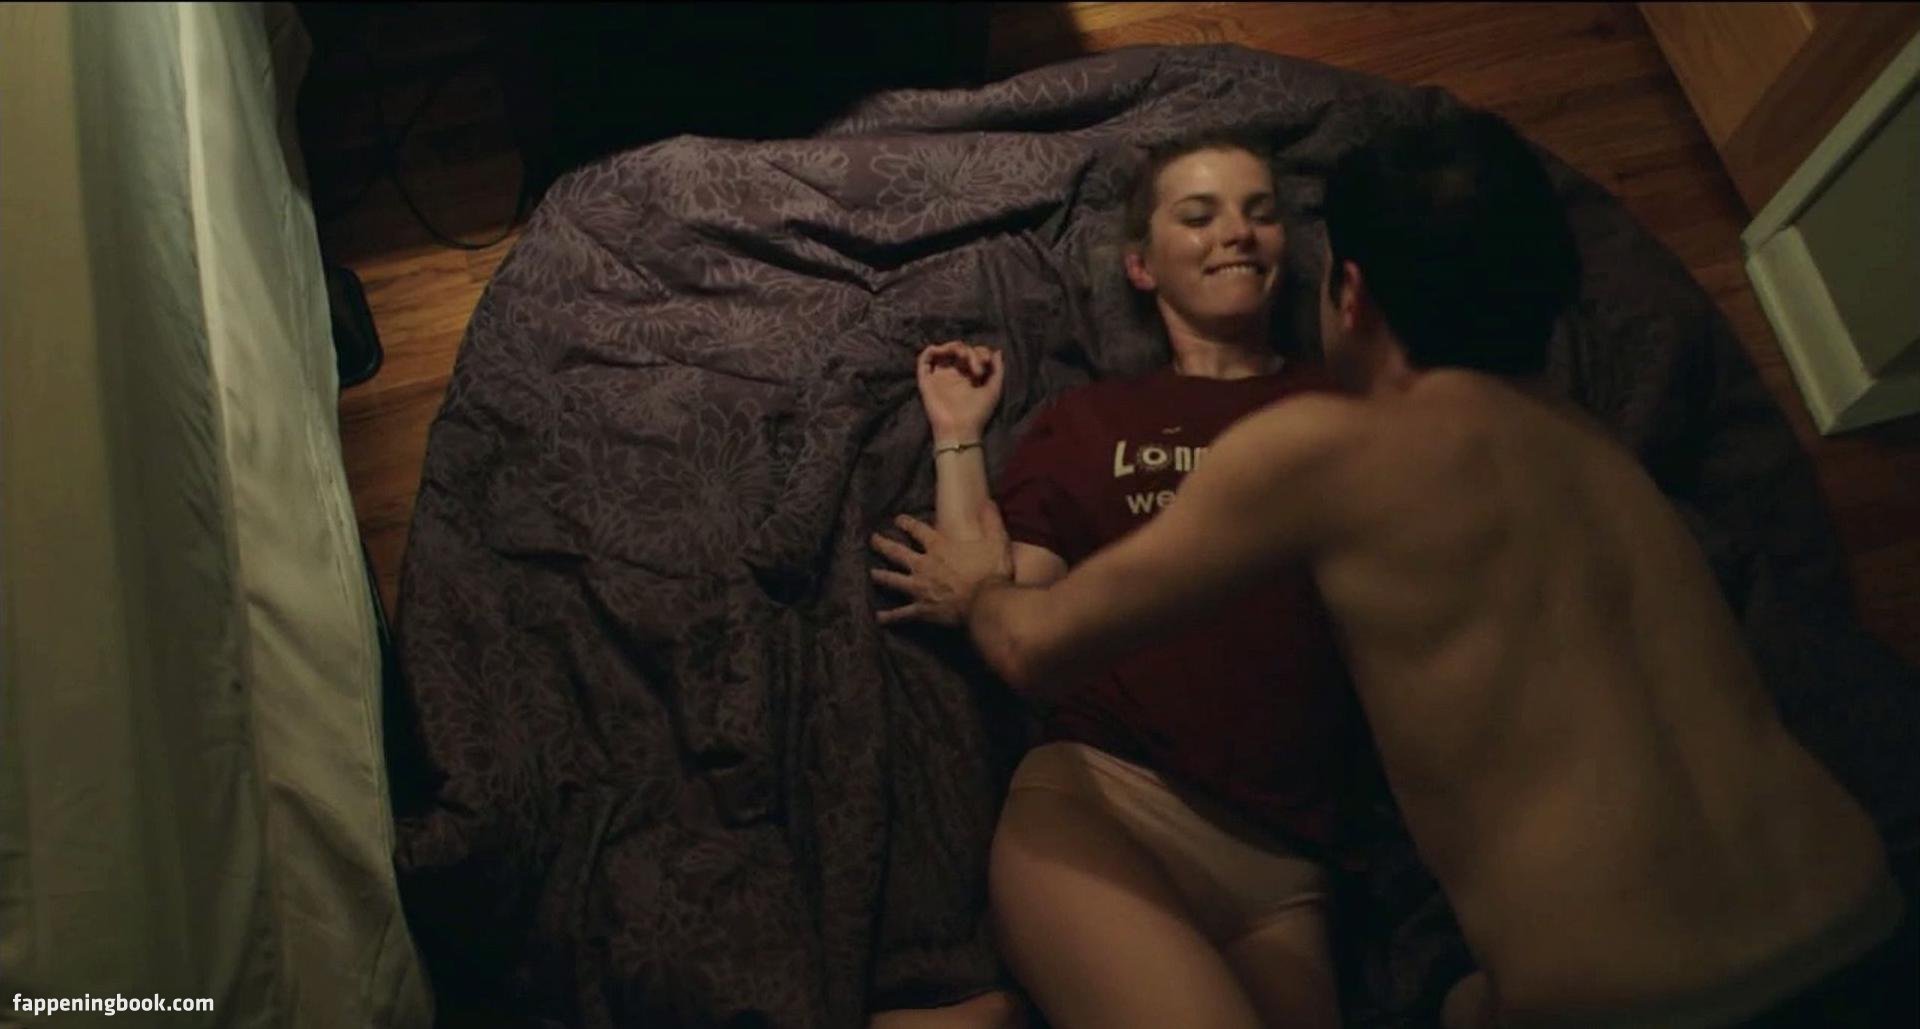 Betty Gilpin Nude, The Fappening - Photo #79107 - FappeningBook.